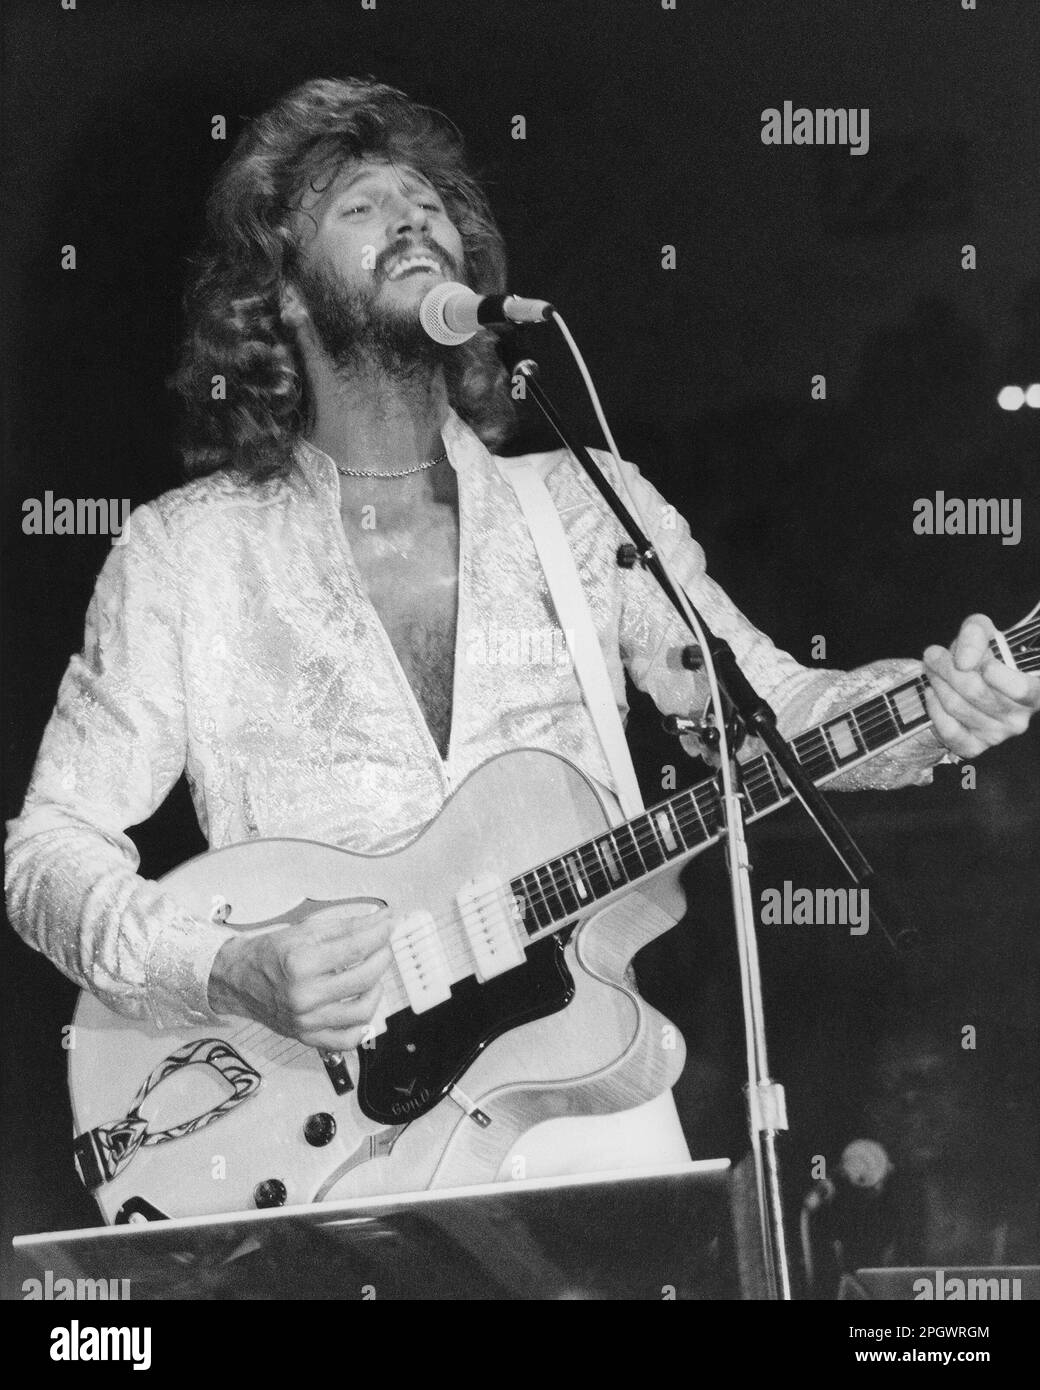 Barry Gibb leading the Bee Gees at the Providence, Rhode Island, Civic Center, USA, August 27, 1979. Stock Photo